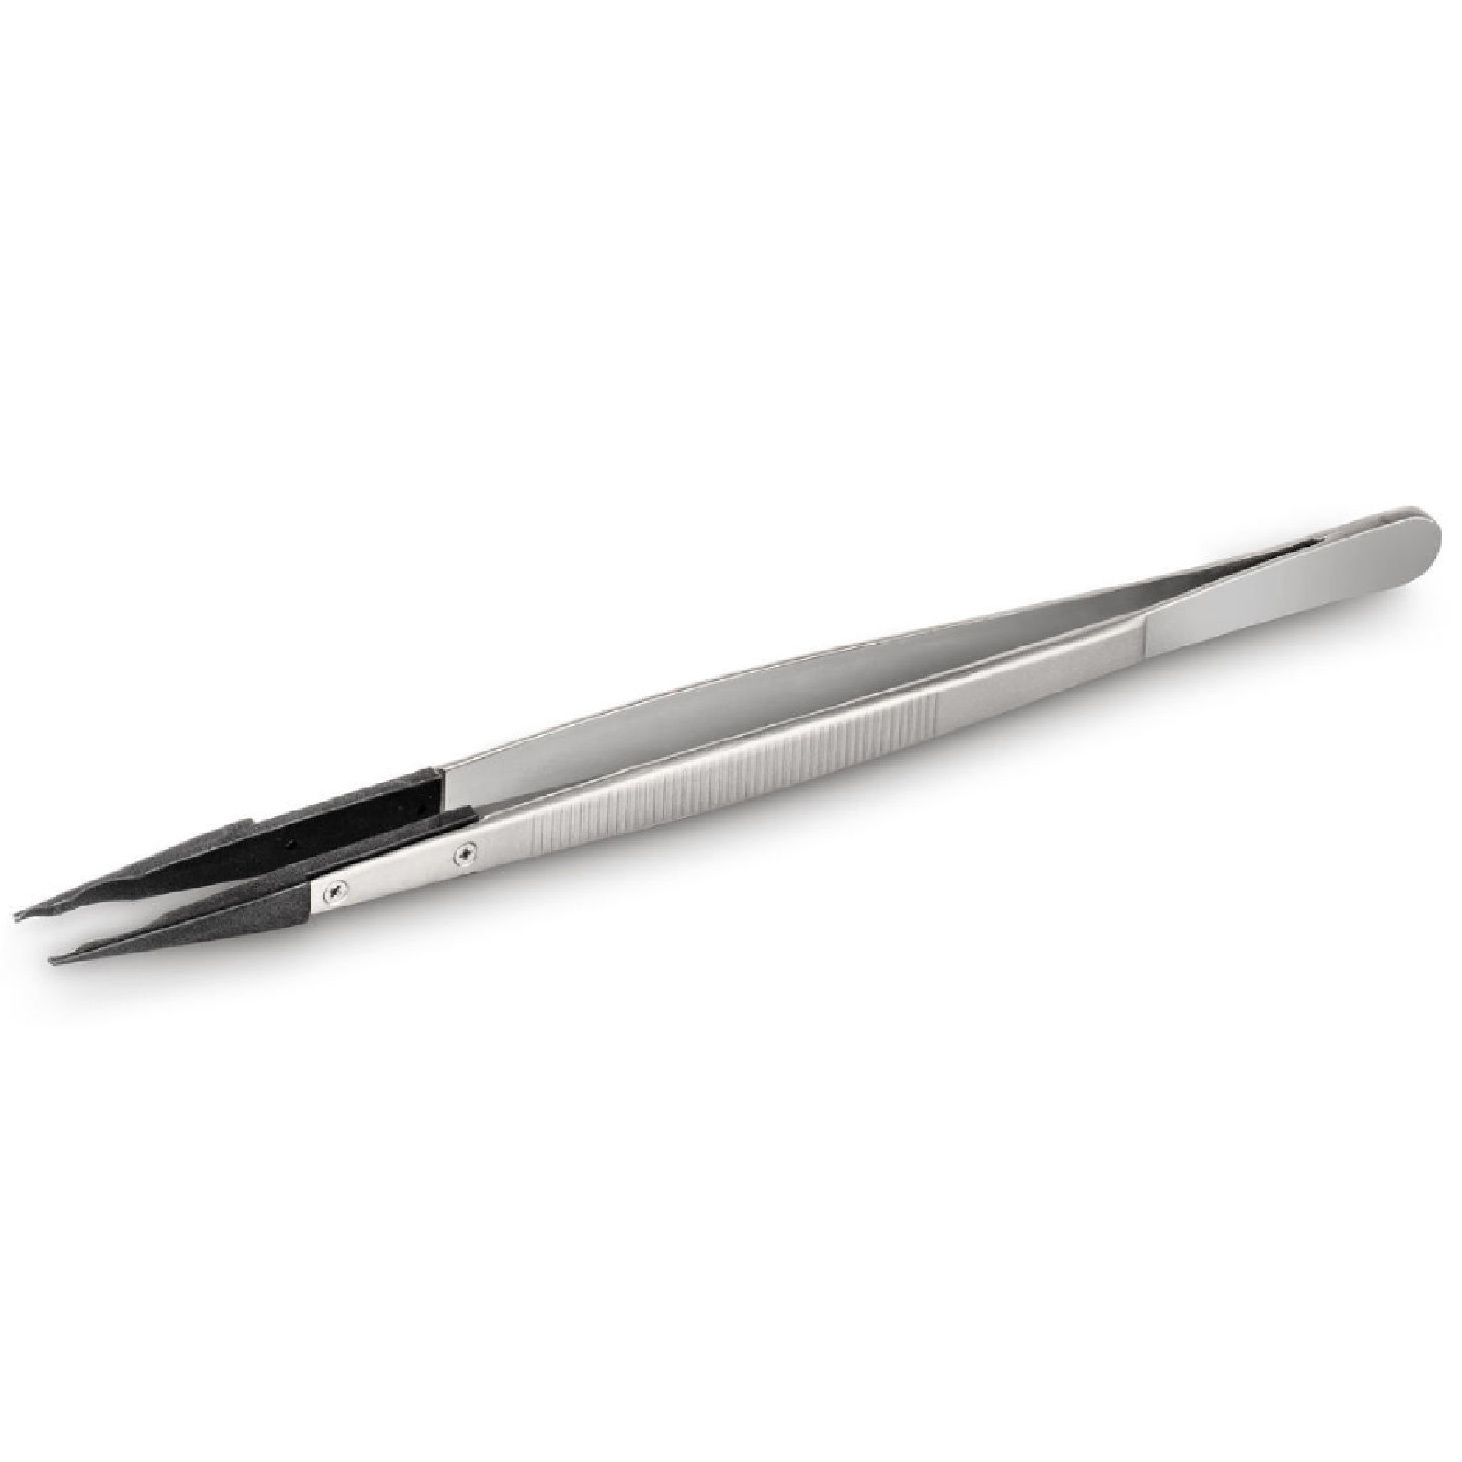 K 315-247 Tweezers 136mm, stainless steel, straight, high-quality carbon tips - Kern 315-247